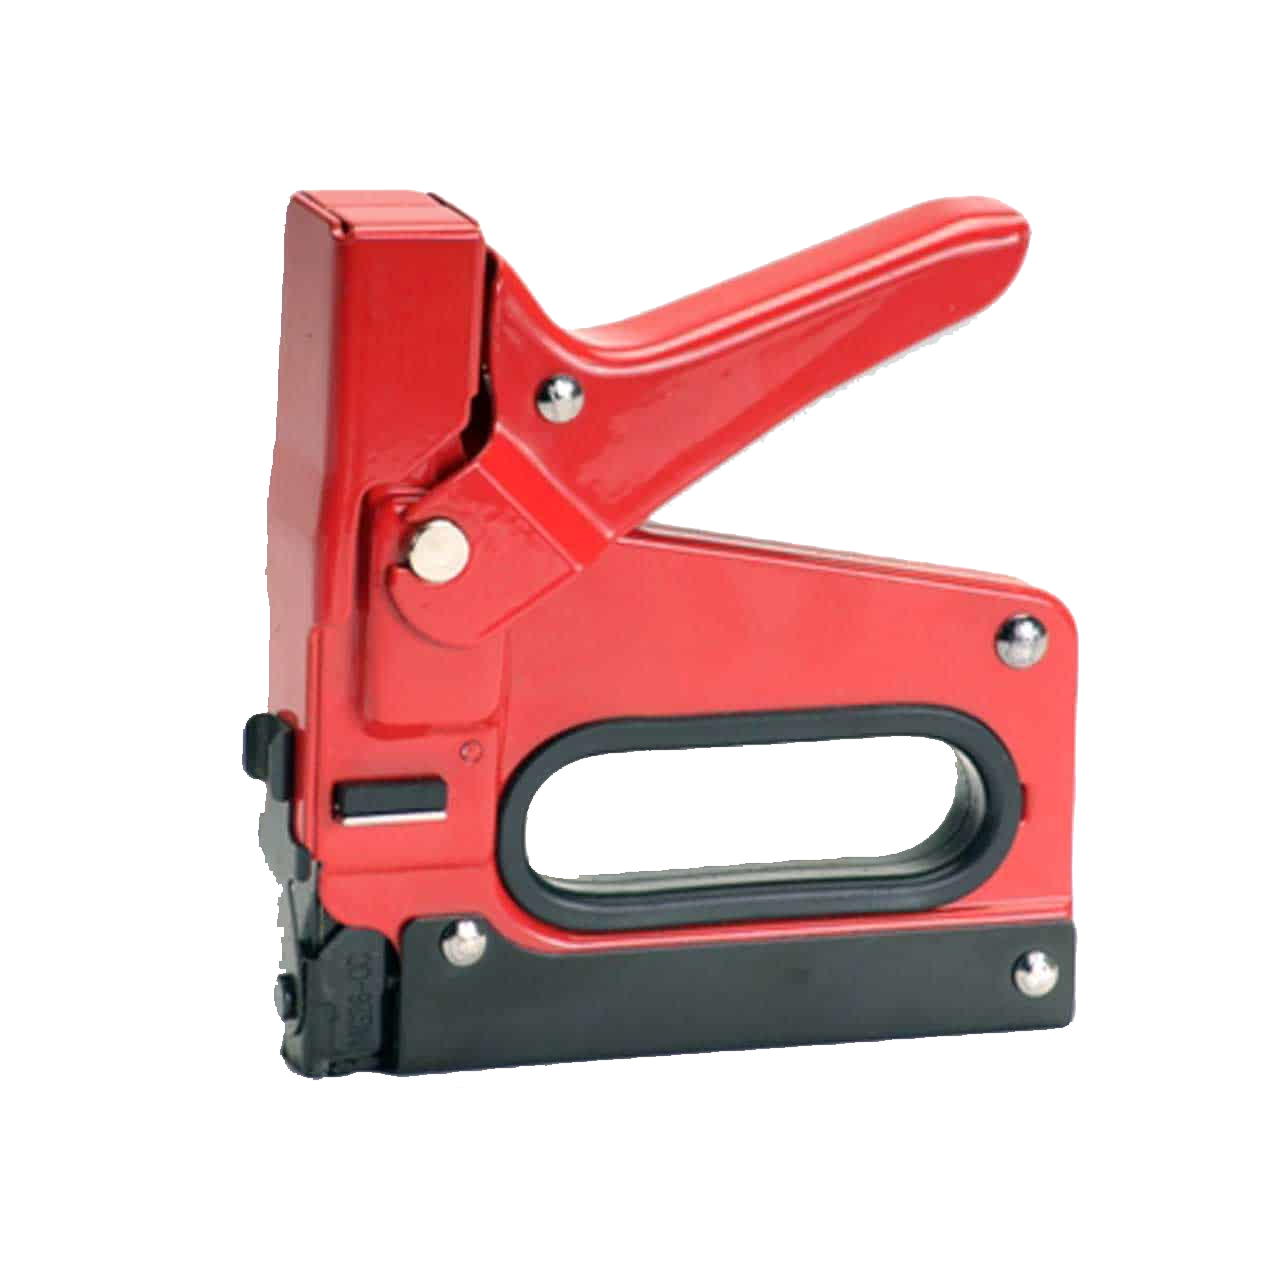 G26 STAPLE GUN BOSTICH TYPE - Ductboard and Flex Duct Tools